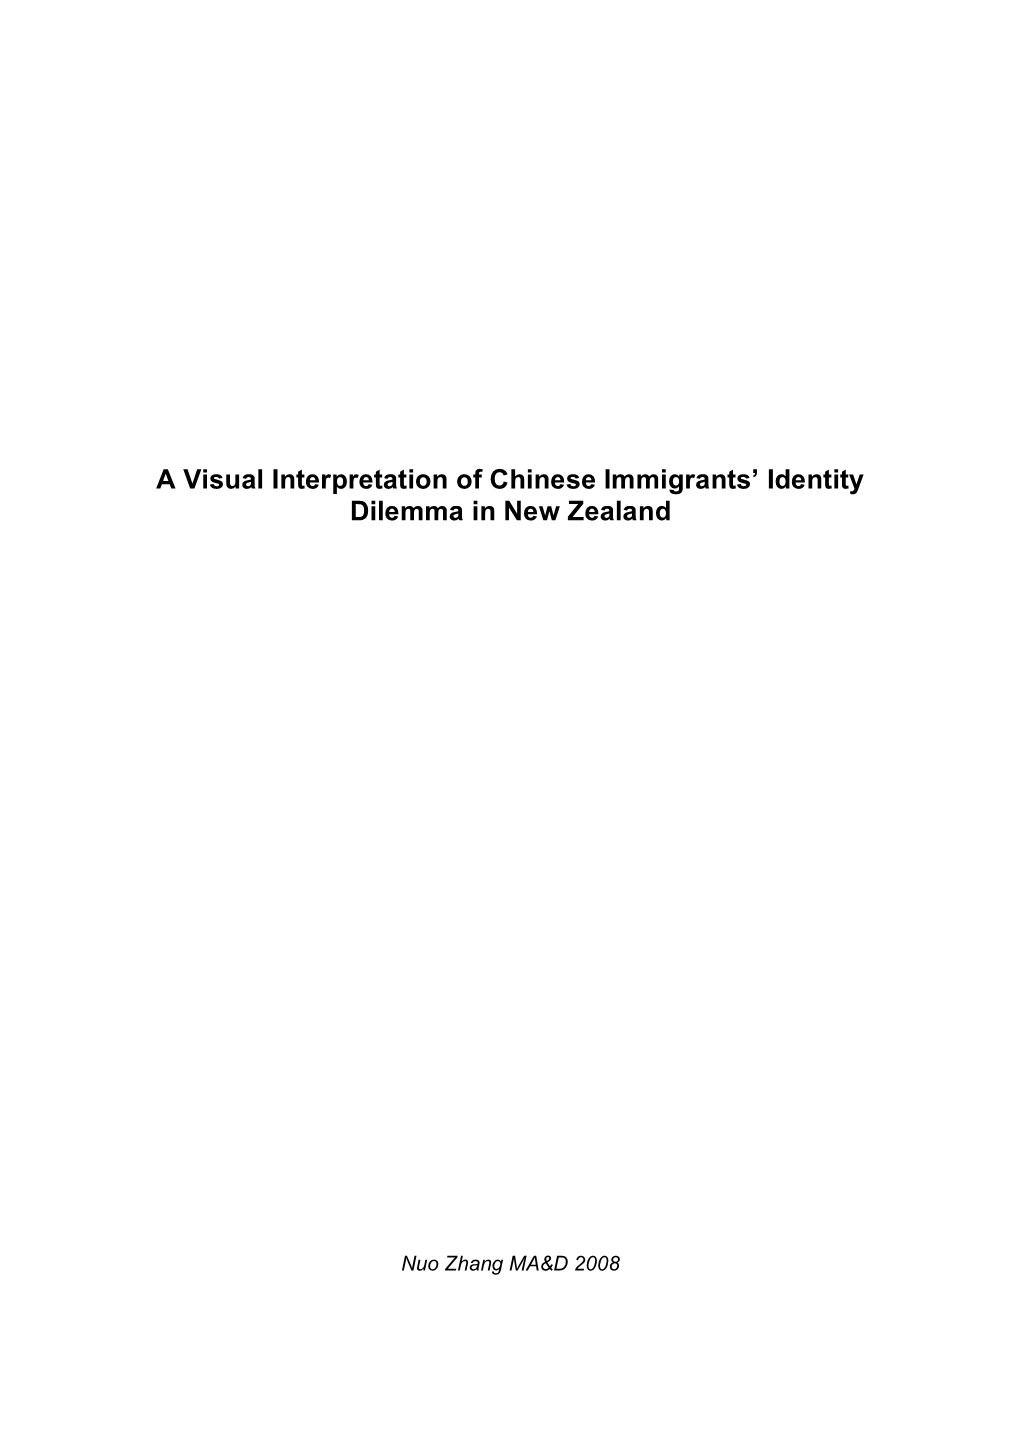 A Visual Interpretation of Chinese Immigrants' Identity Dilemma In